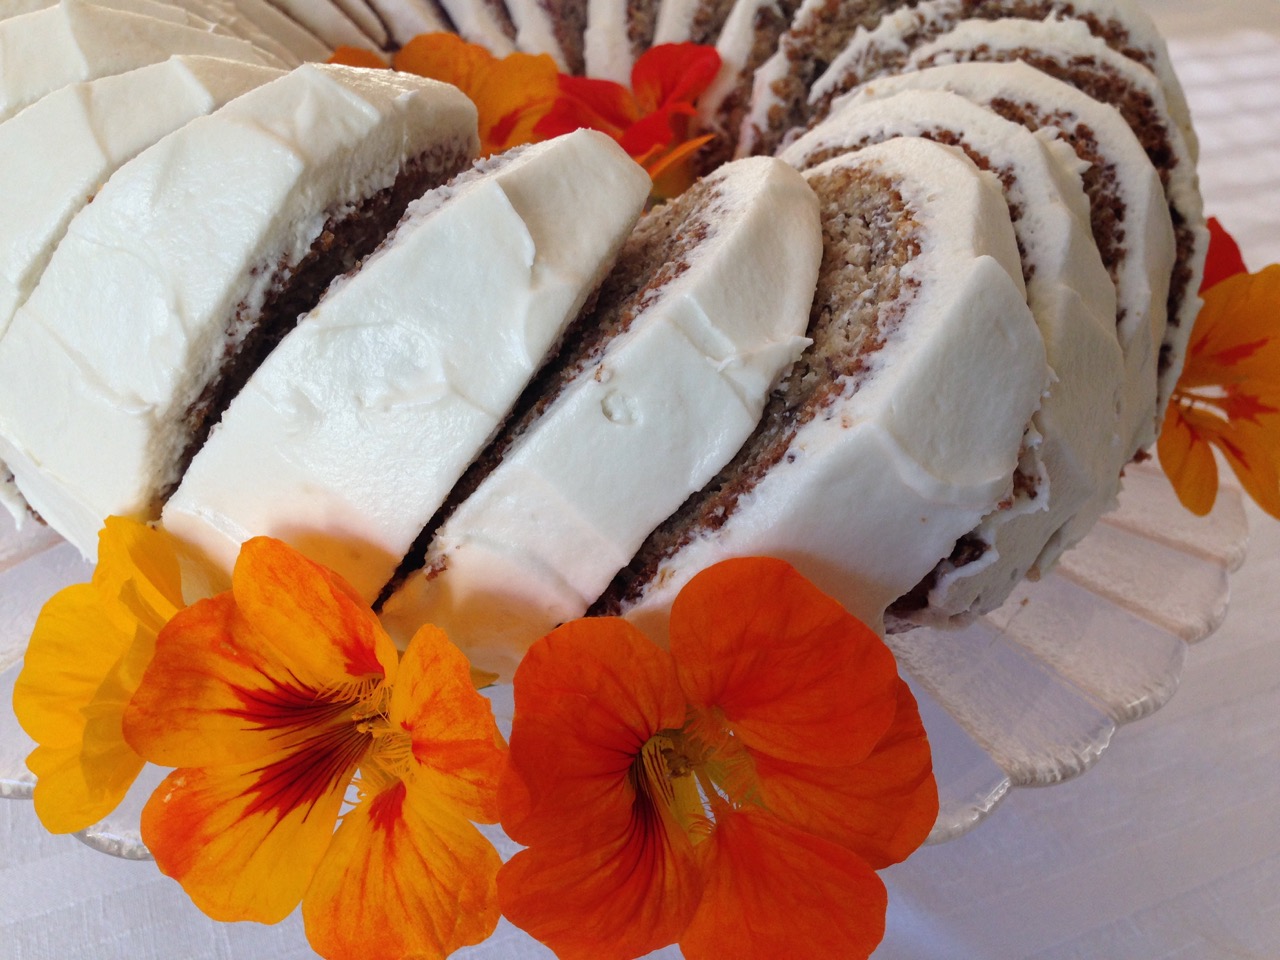 Slices of Banana Bundt Cake with Cream Cheese Icing garnished with fresh nasturtiums.